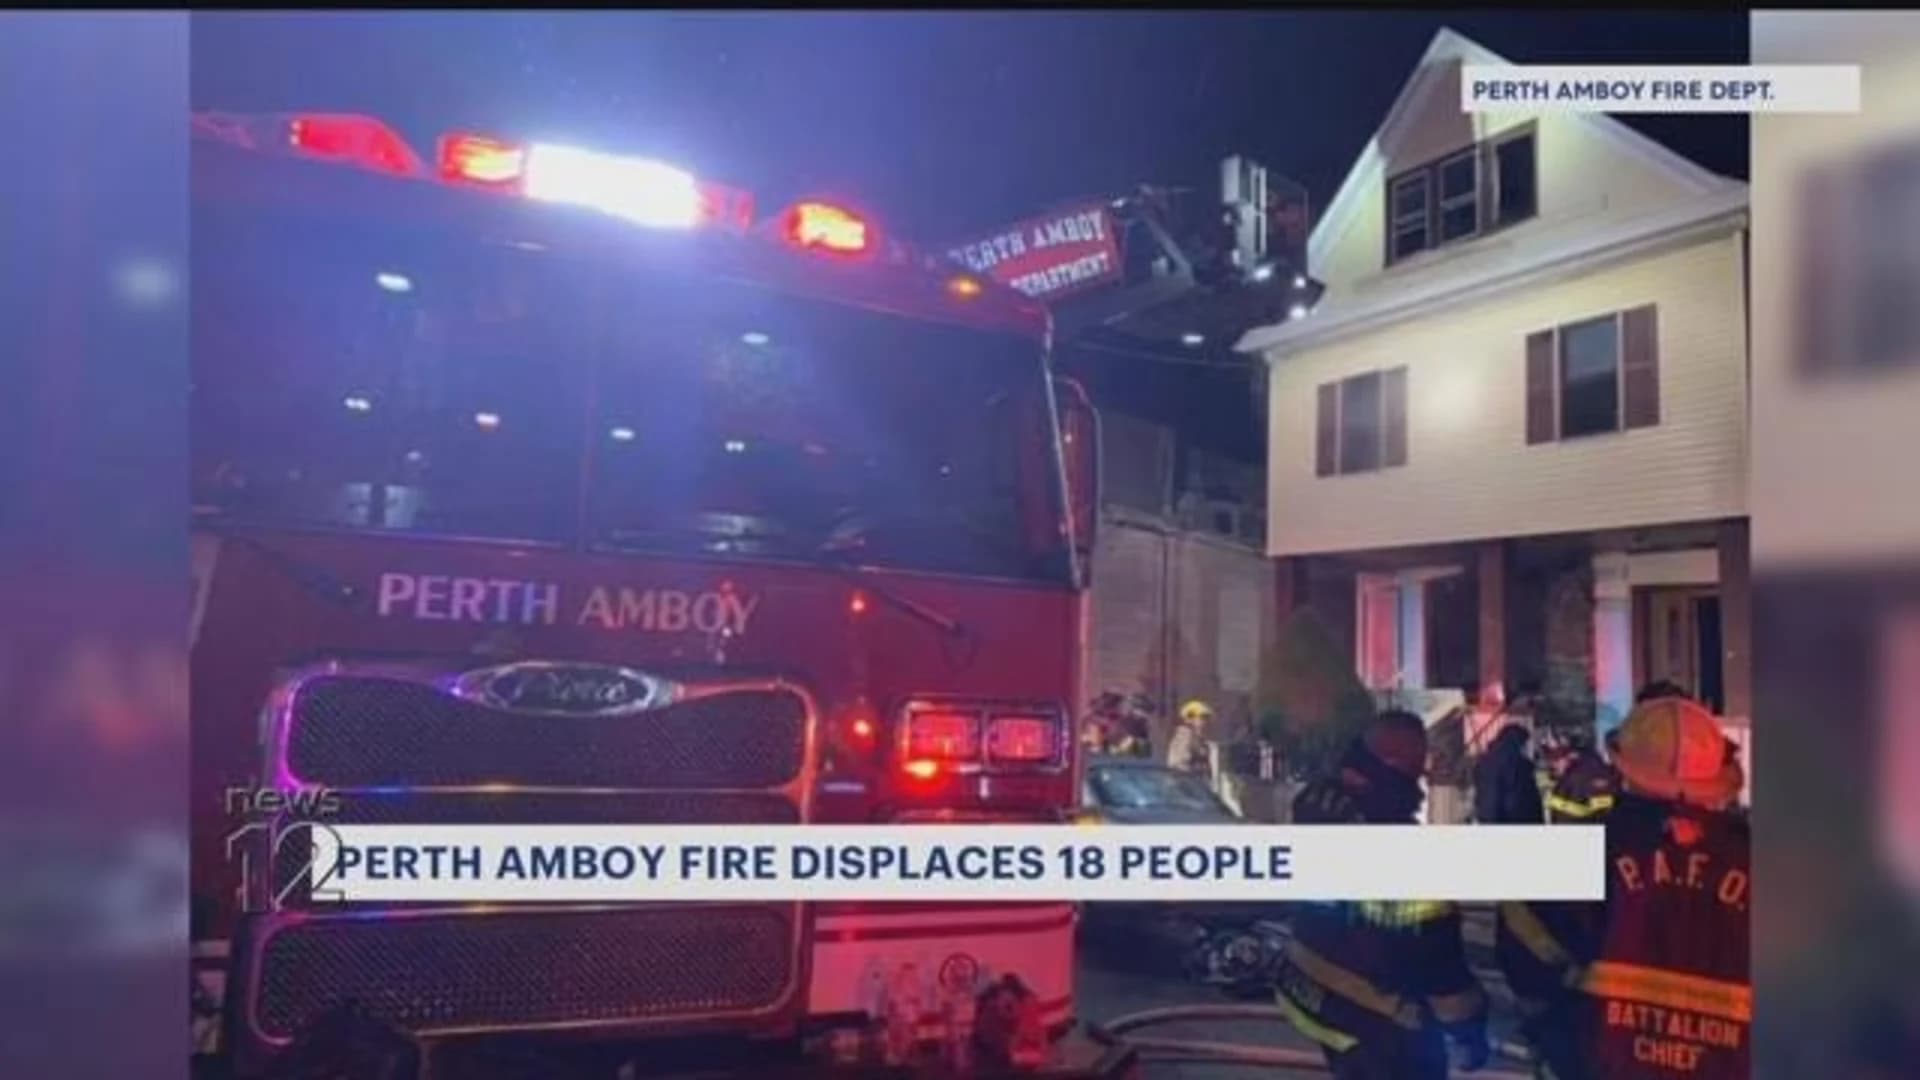 Officials: 4 hurt, 18 displaced as fire destroys Perth Amboy home